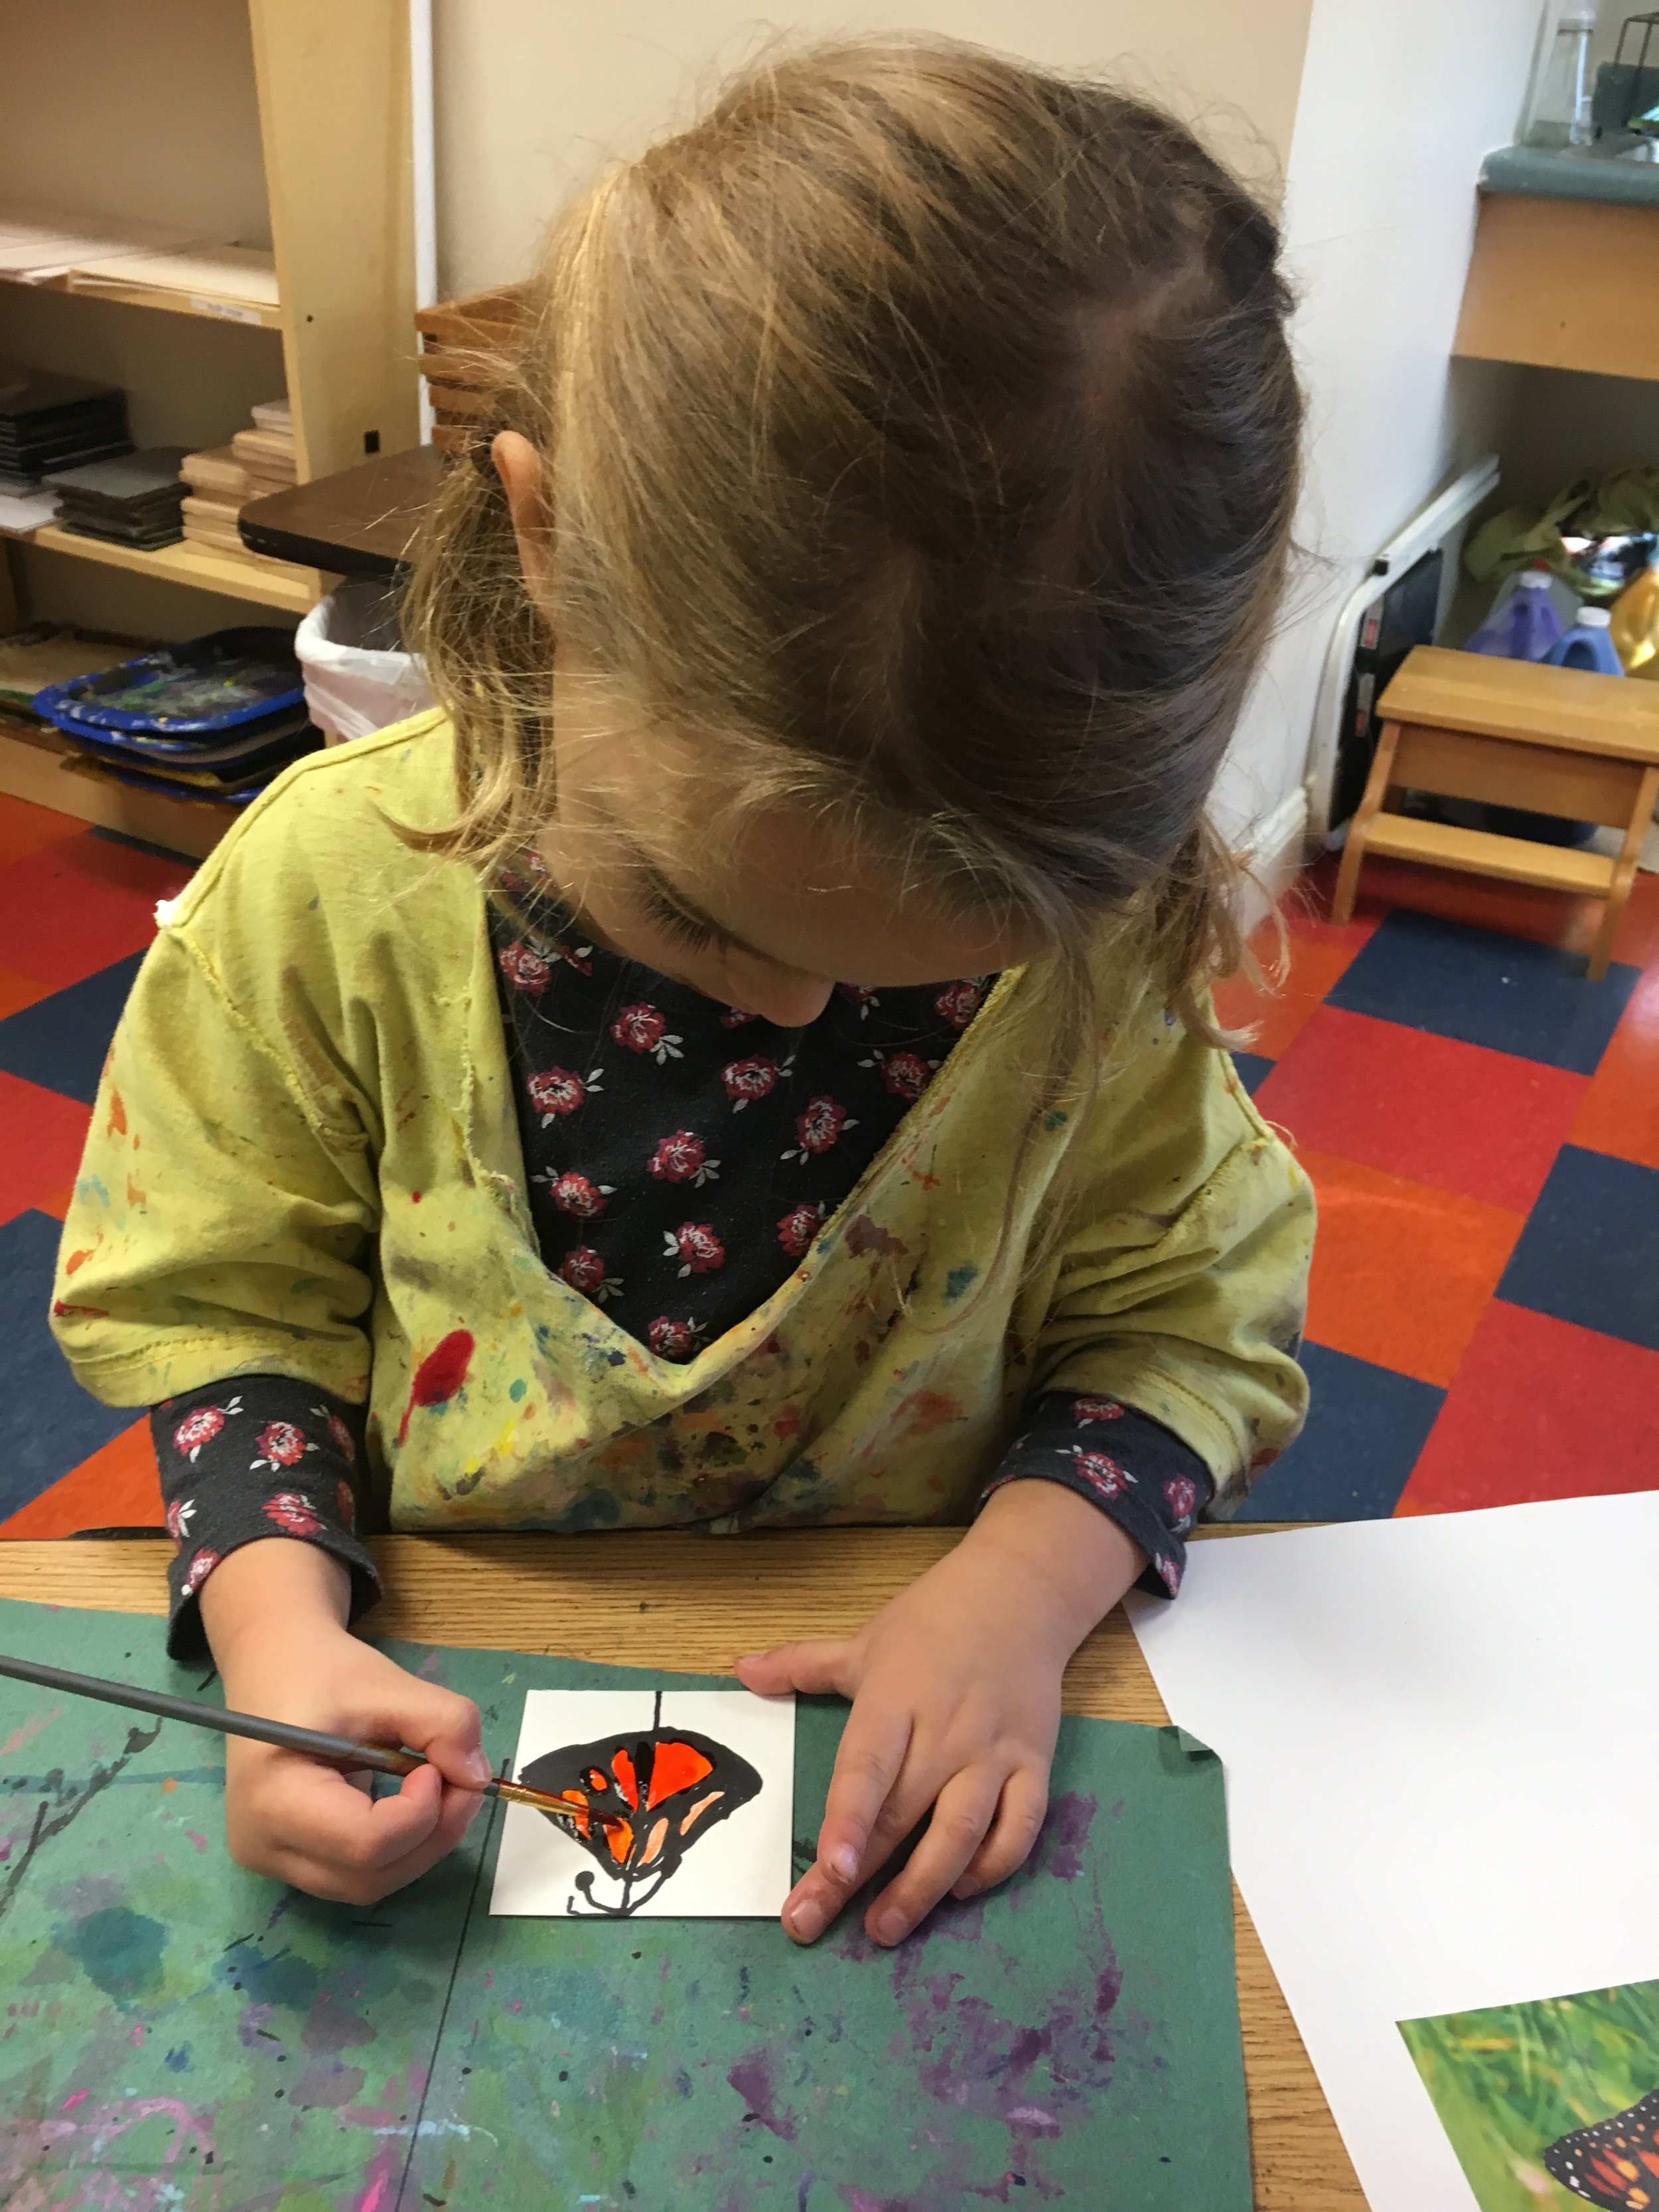  This 4 year old girl uses black sharpie and water color paints to create a Monarch butterfly in the art studio. 